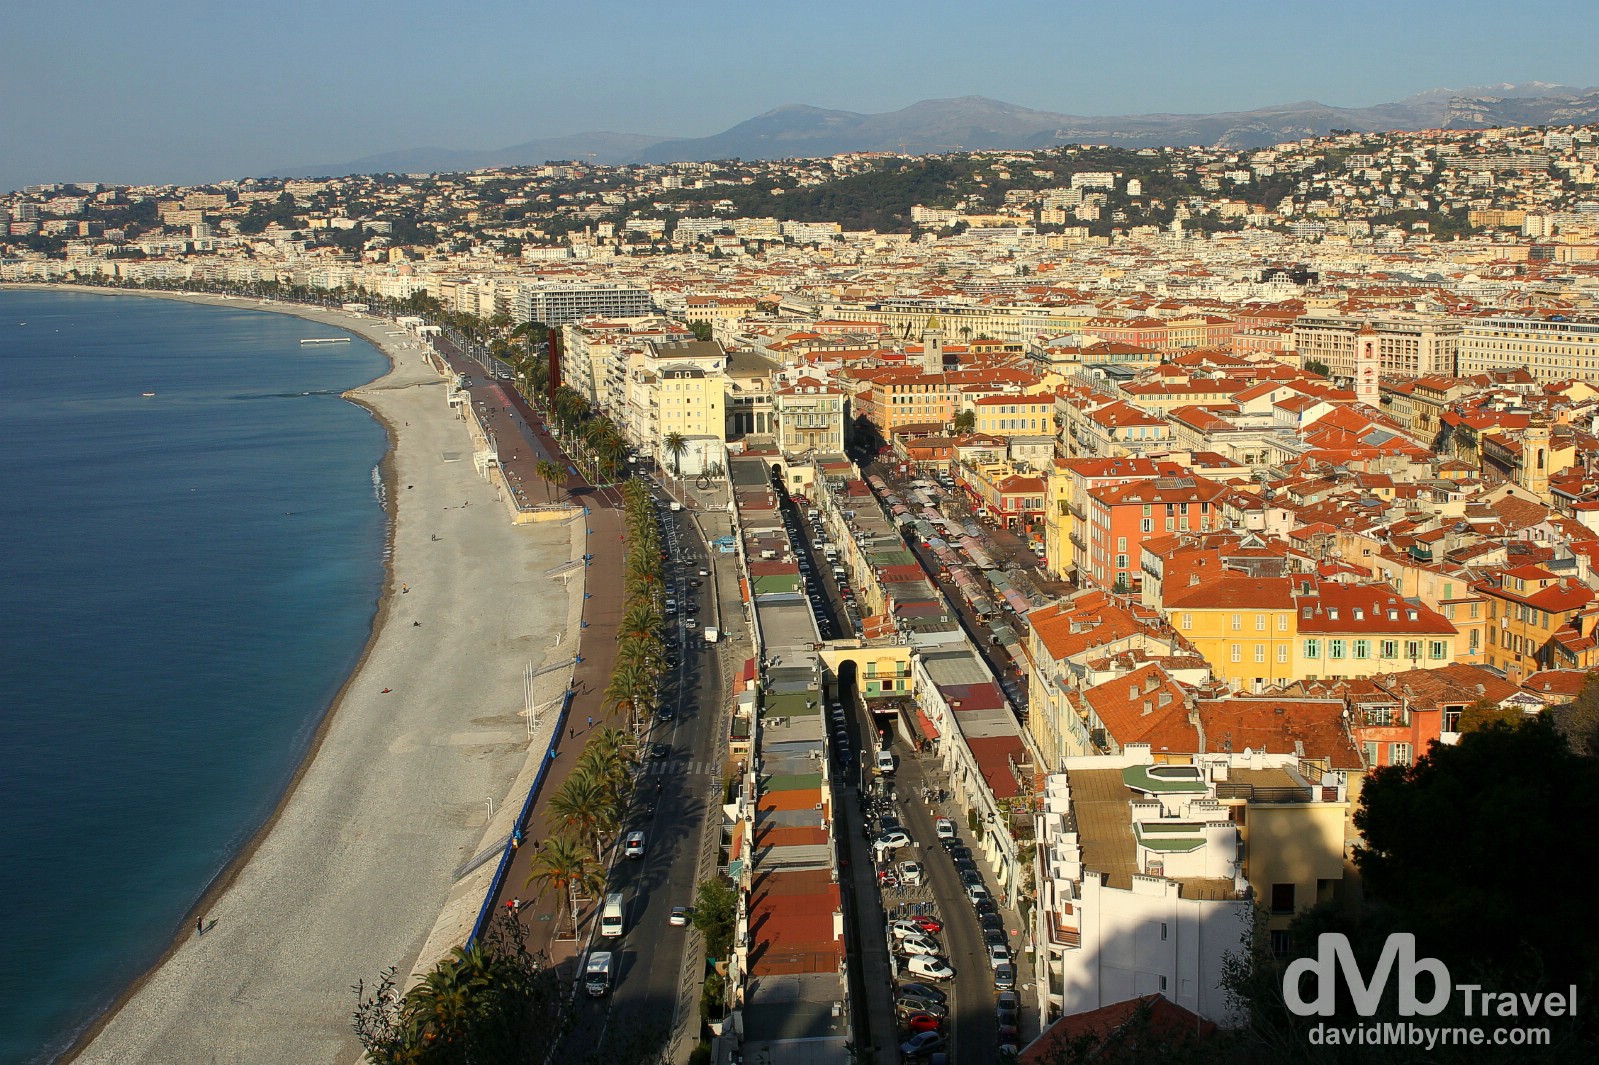 Nice as seen from Parc du Chateau, Nice, Côte d'Azur, France. March 14, 2014.